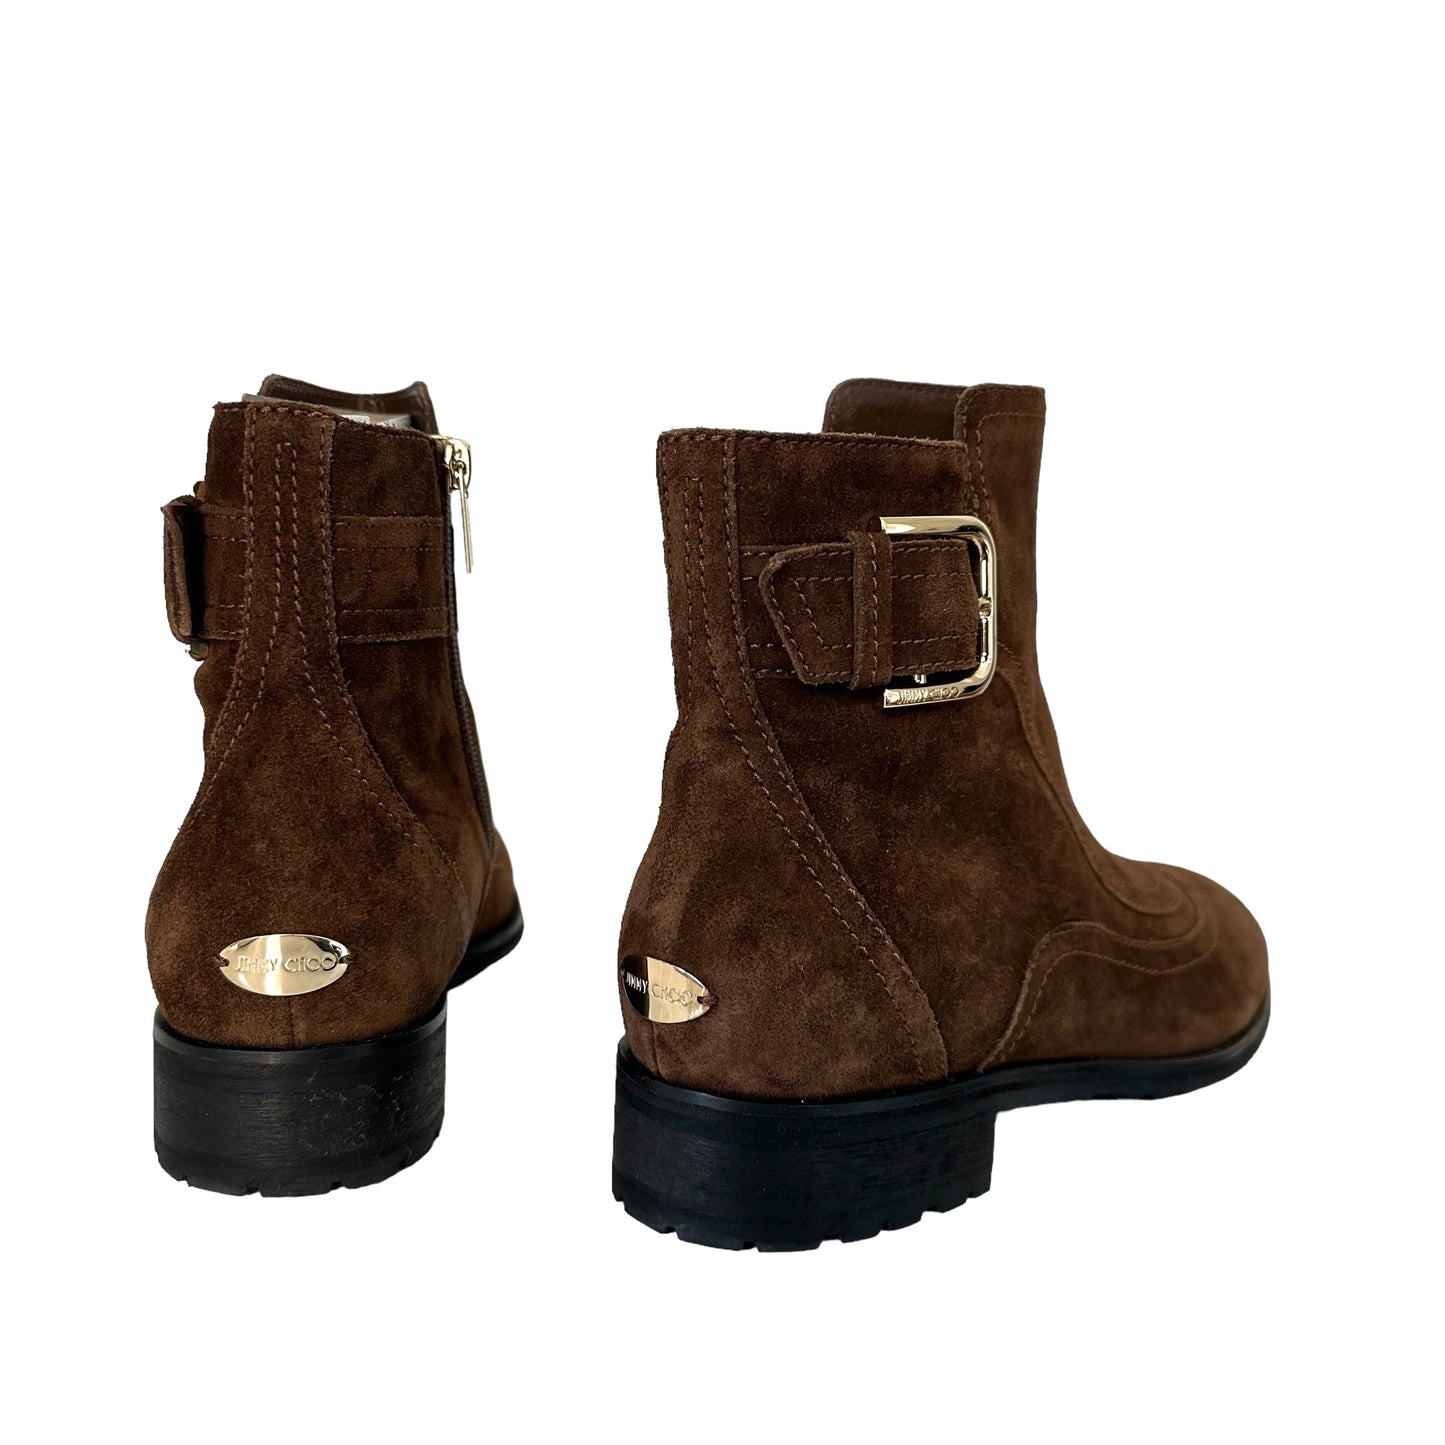 Brown Suede Boots - 9